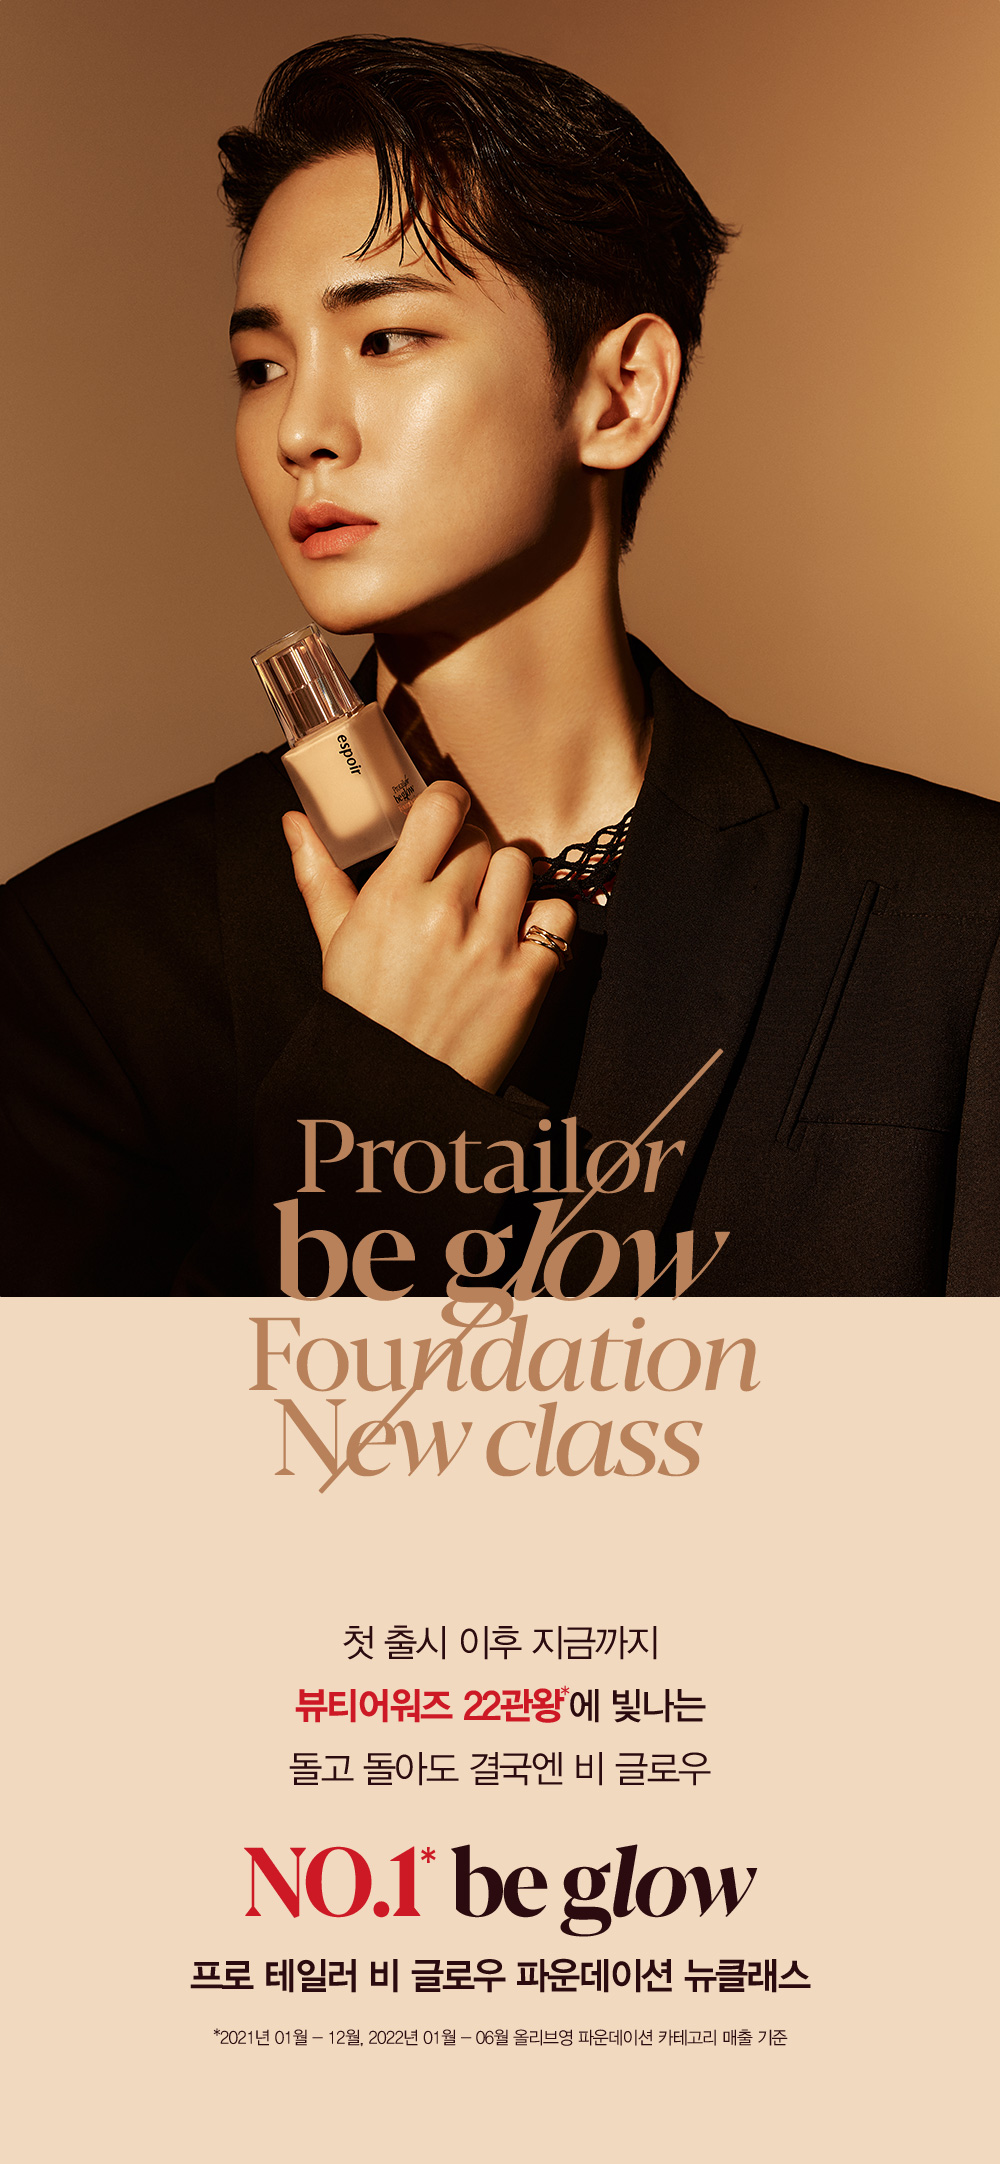 Protailor be glow Foundation New class